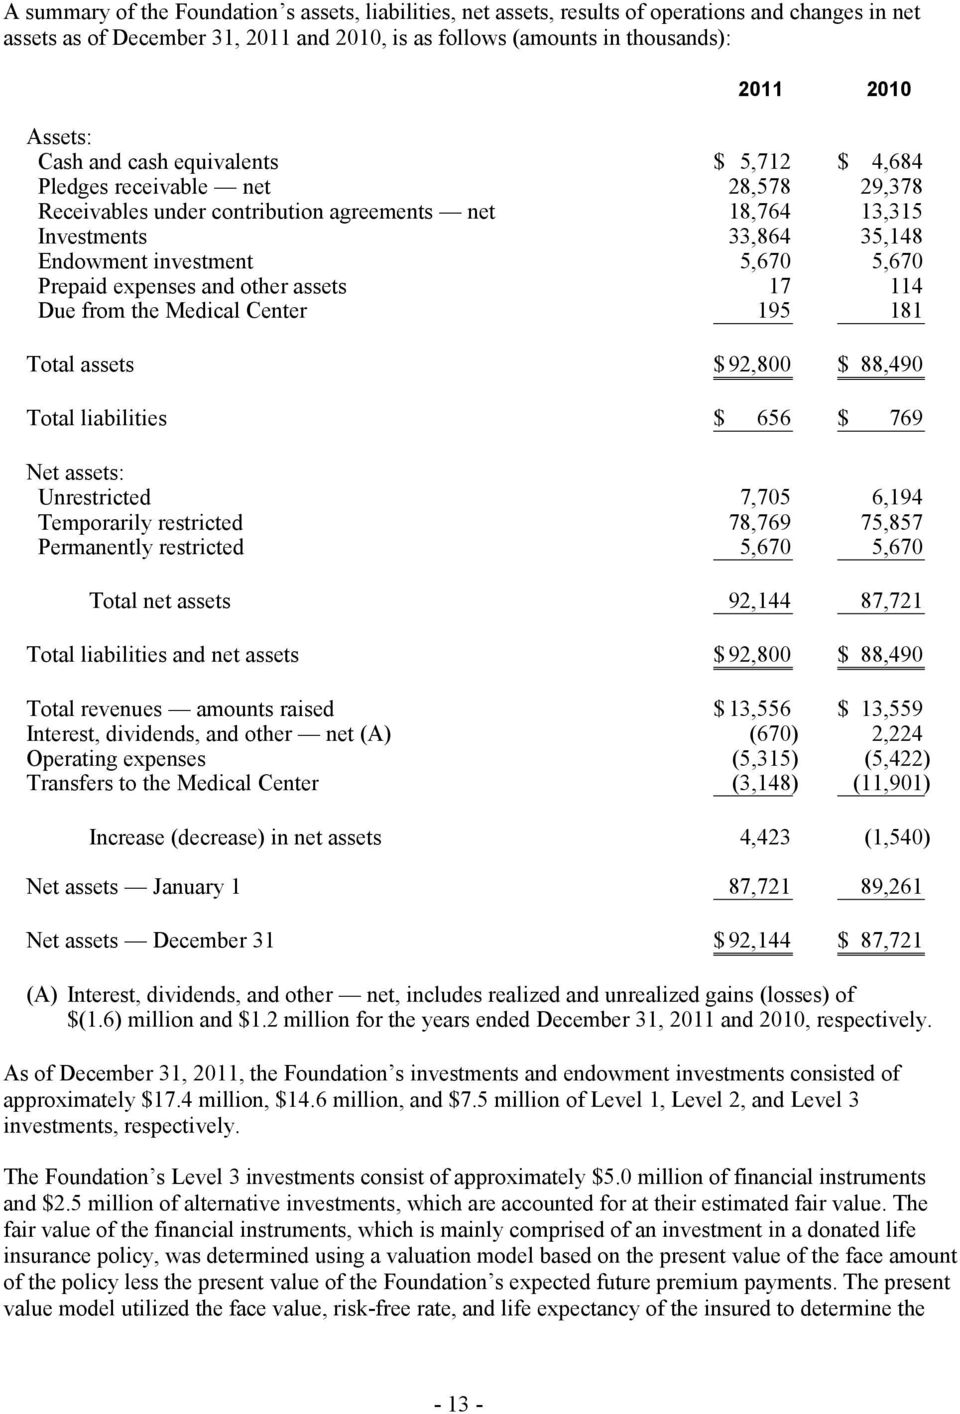 5,670 Prepaid expenses and other assets 17 114 Due from the Medical Center 195 181 Total assets $ 92,800 $ 88,490 Total liabilities $ 656 $ 769 Net assets: Unrestricted 7,705 6,194 Temporarily